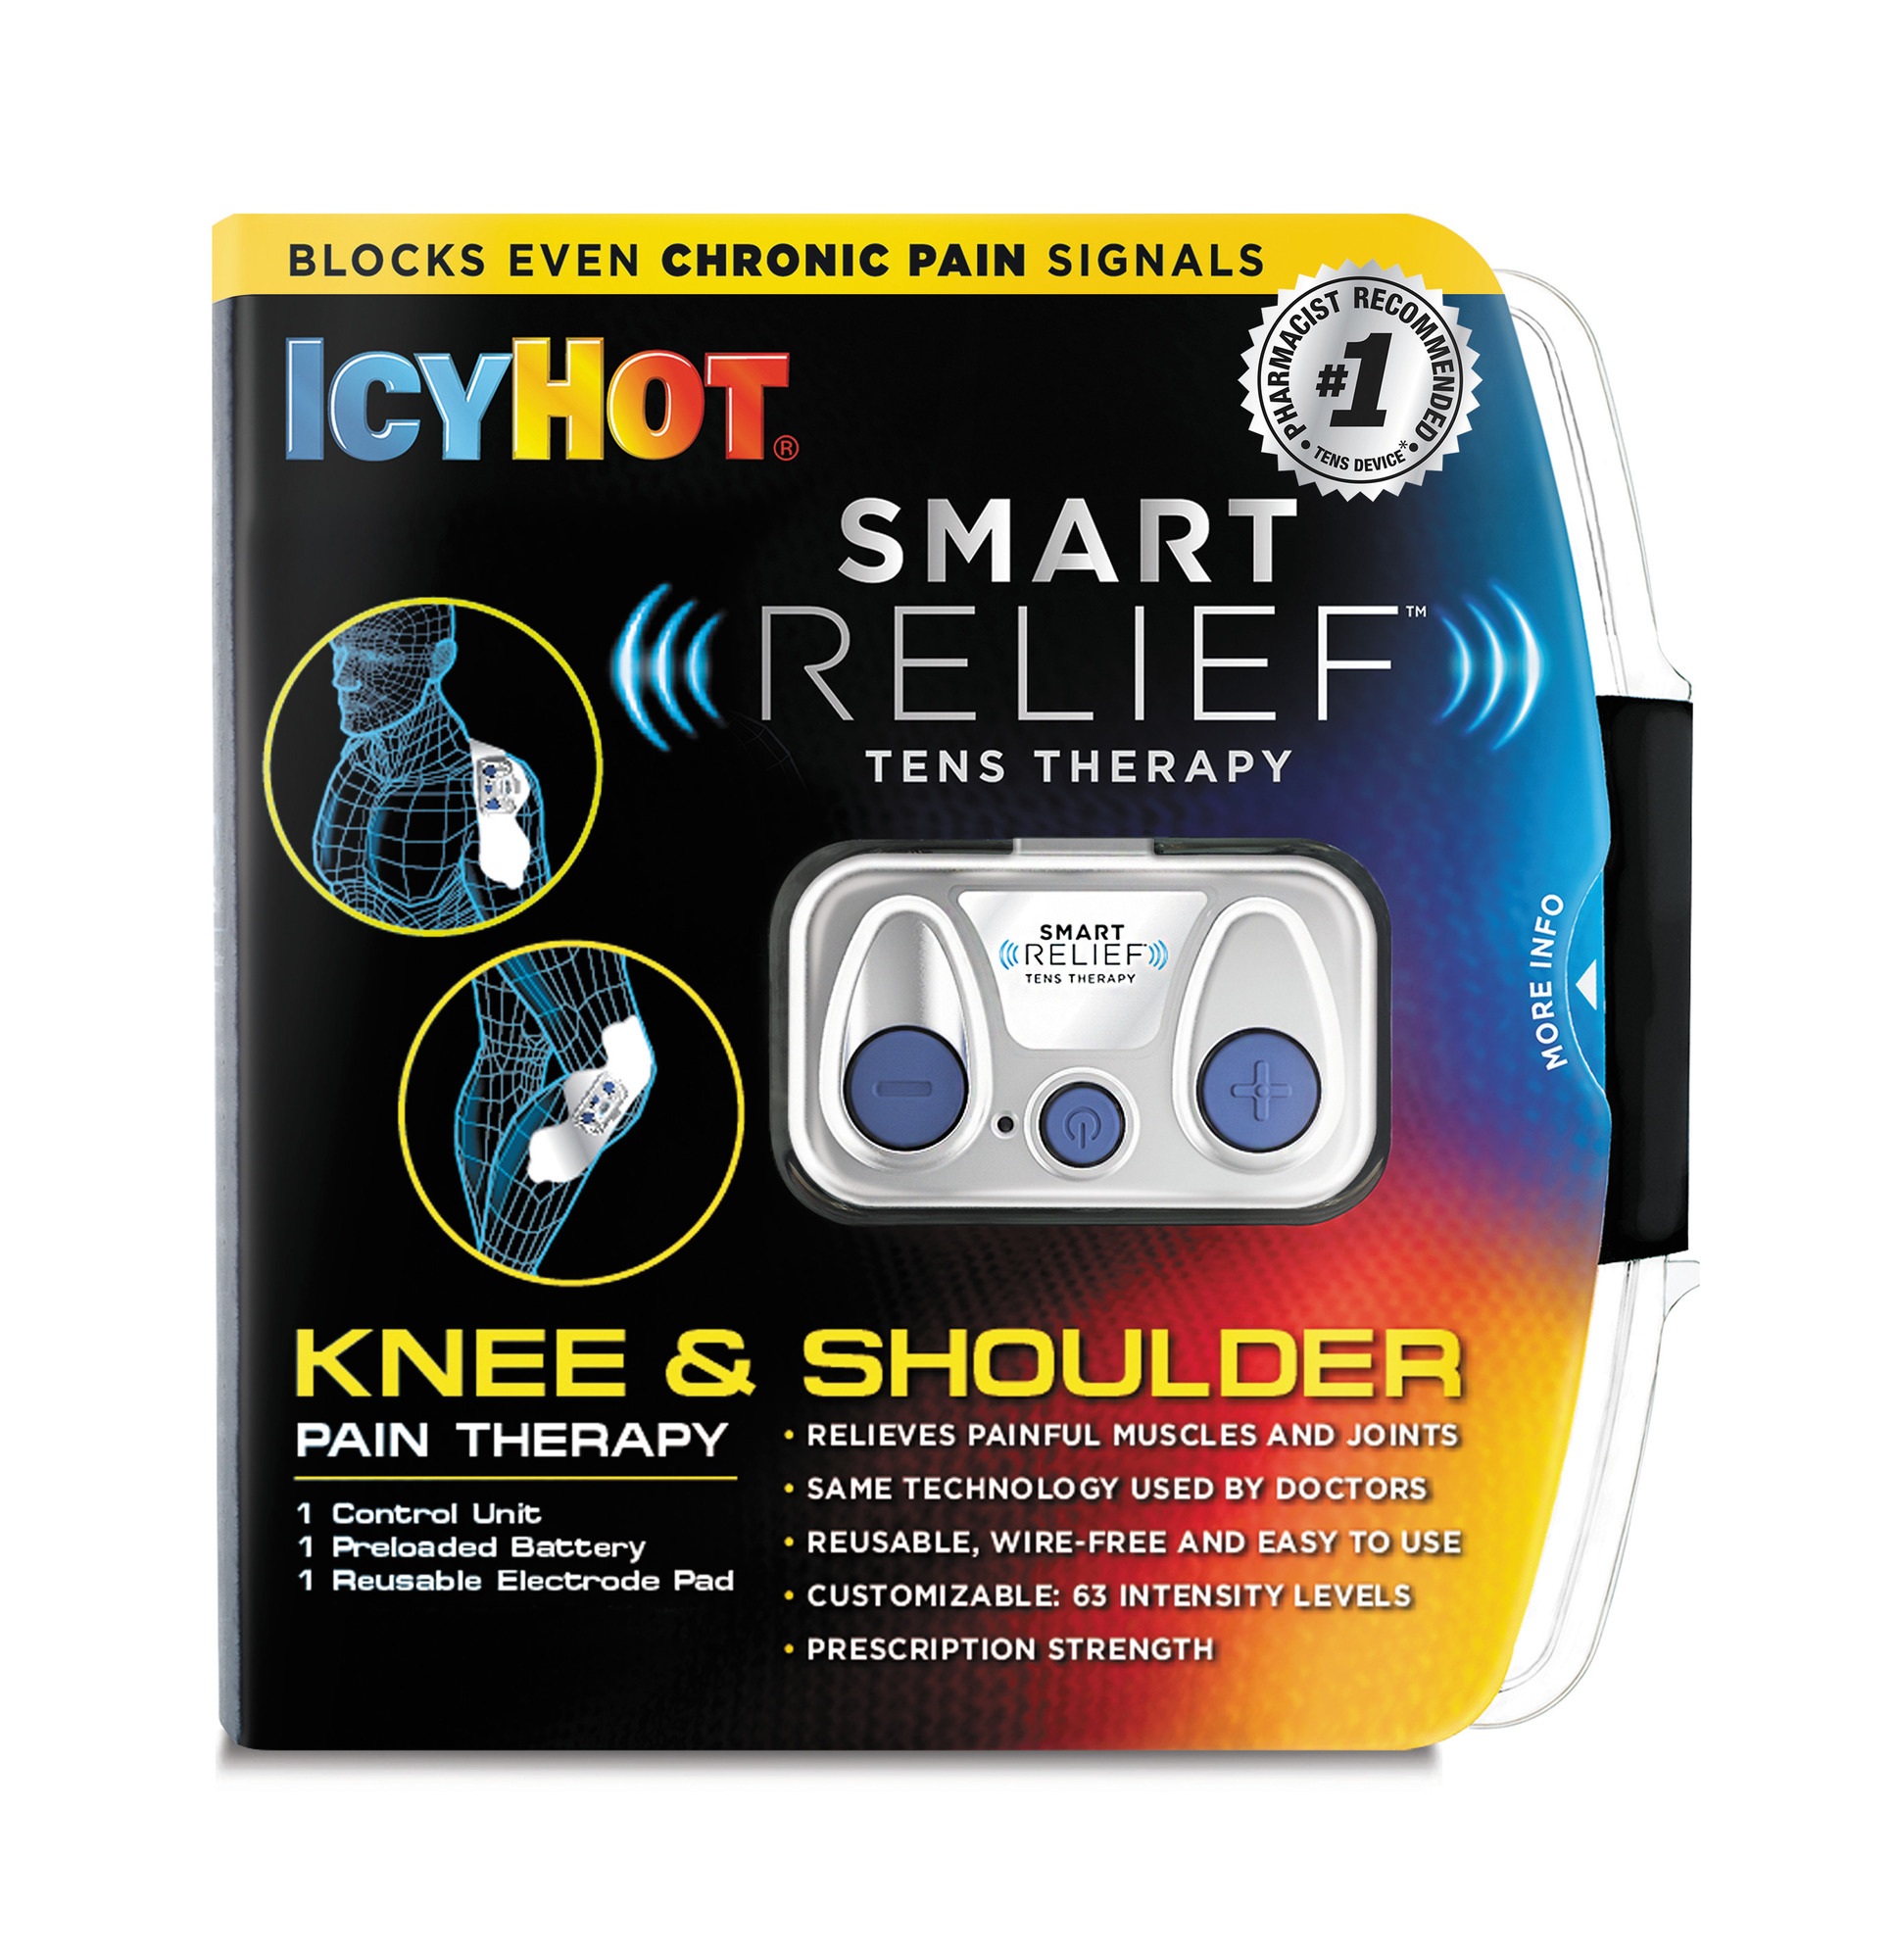 Icy Hot Smart Relief TENS Therapy Knee and Shoulder